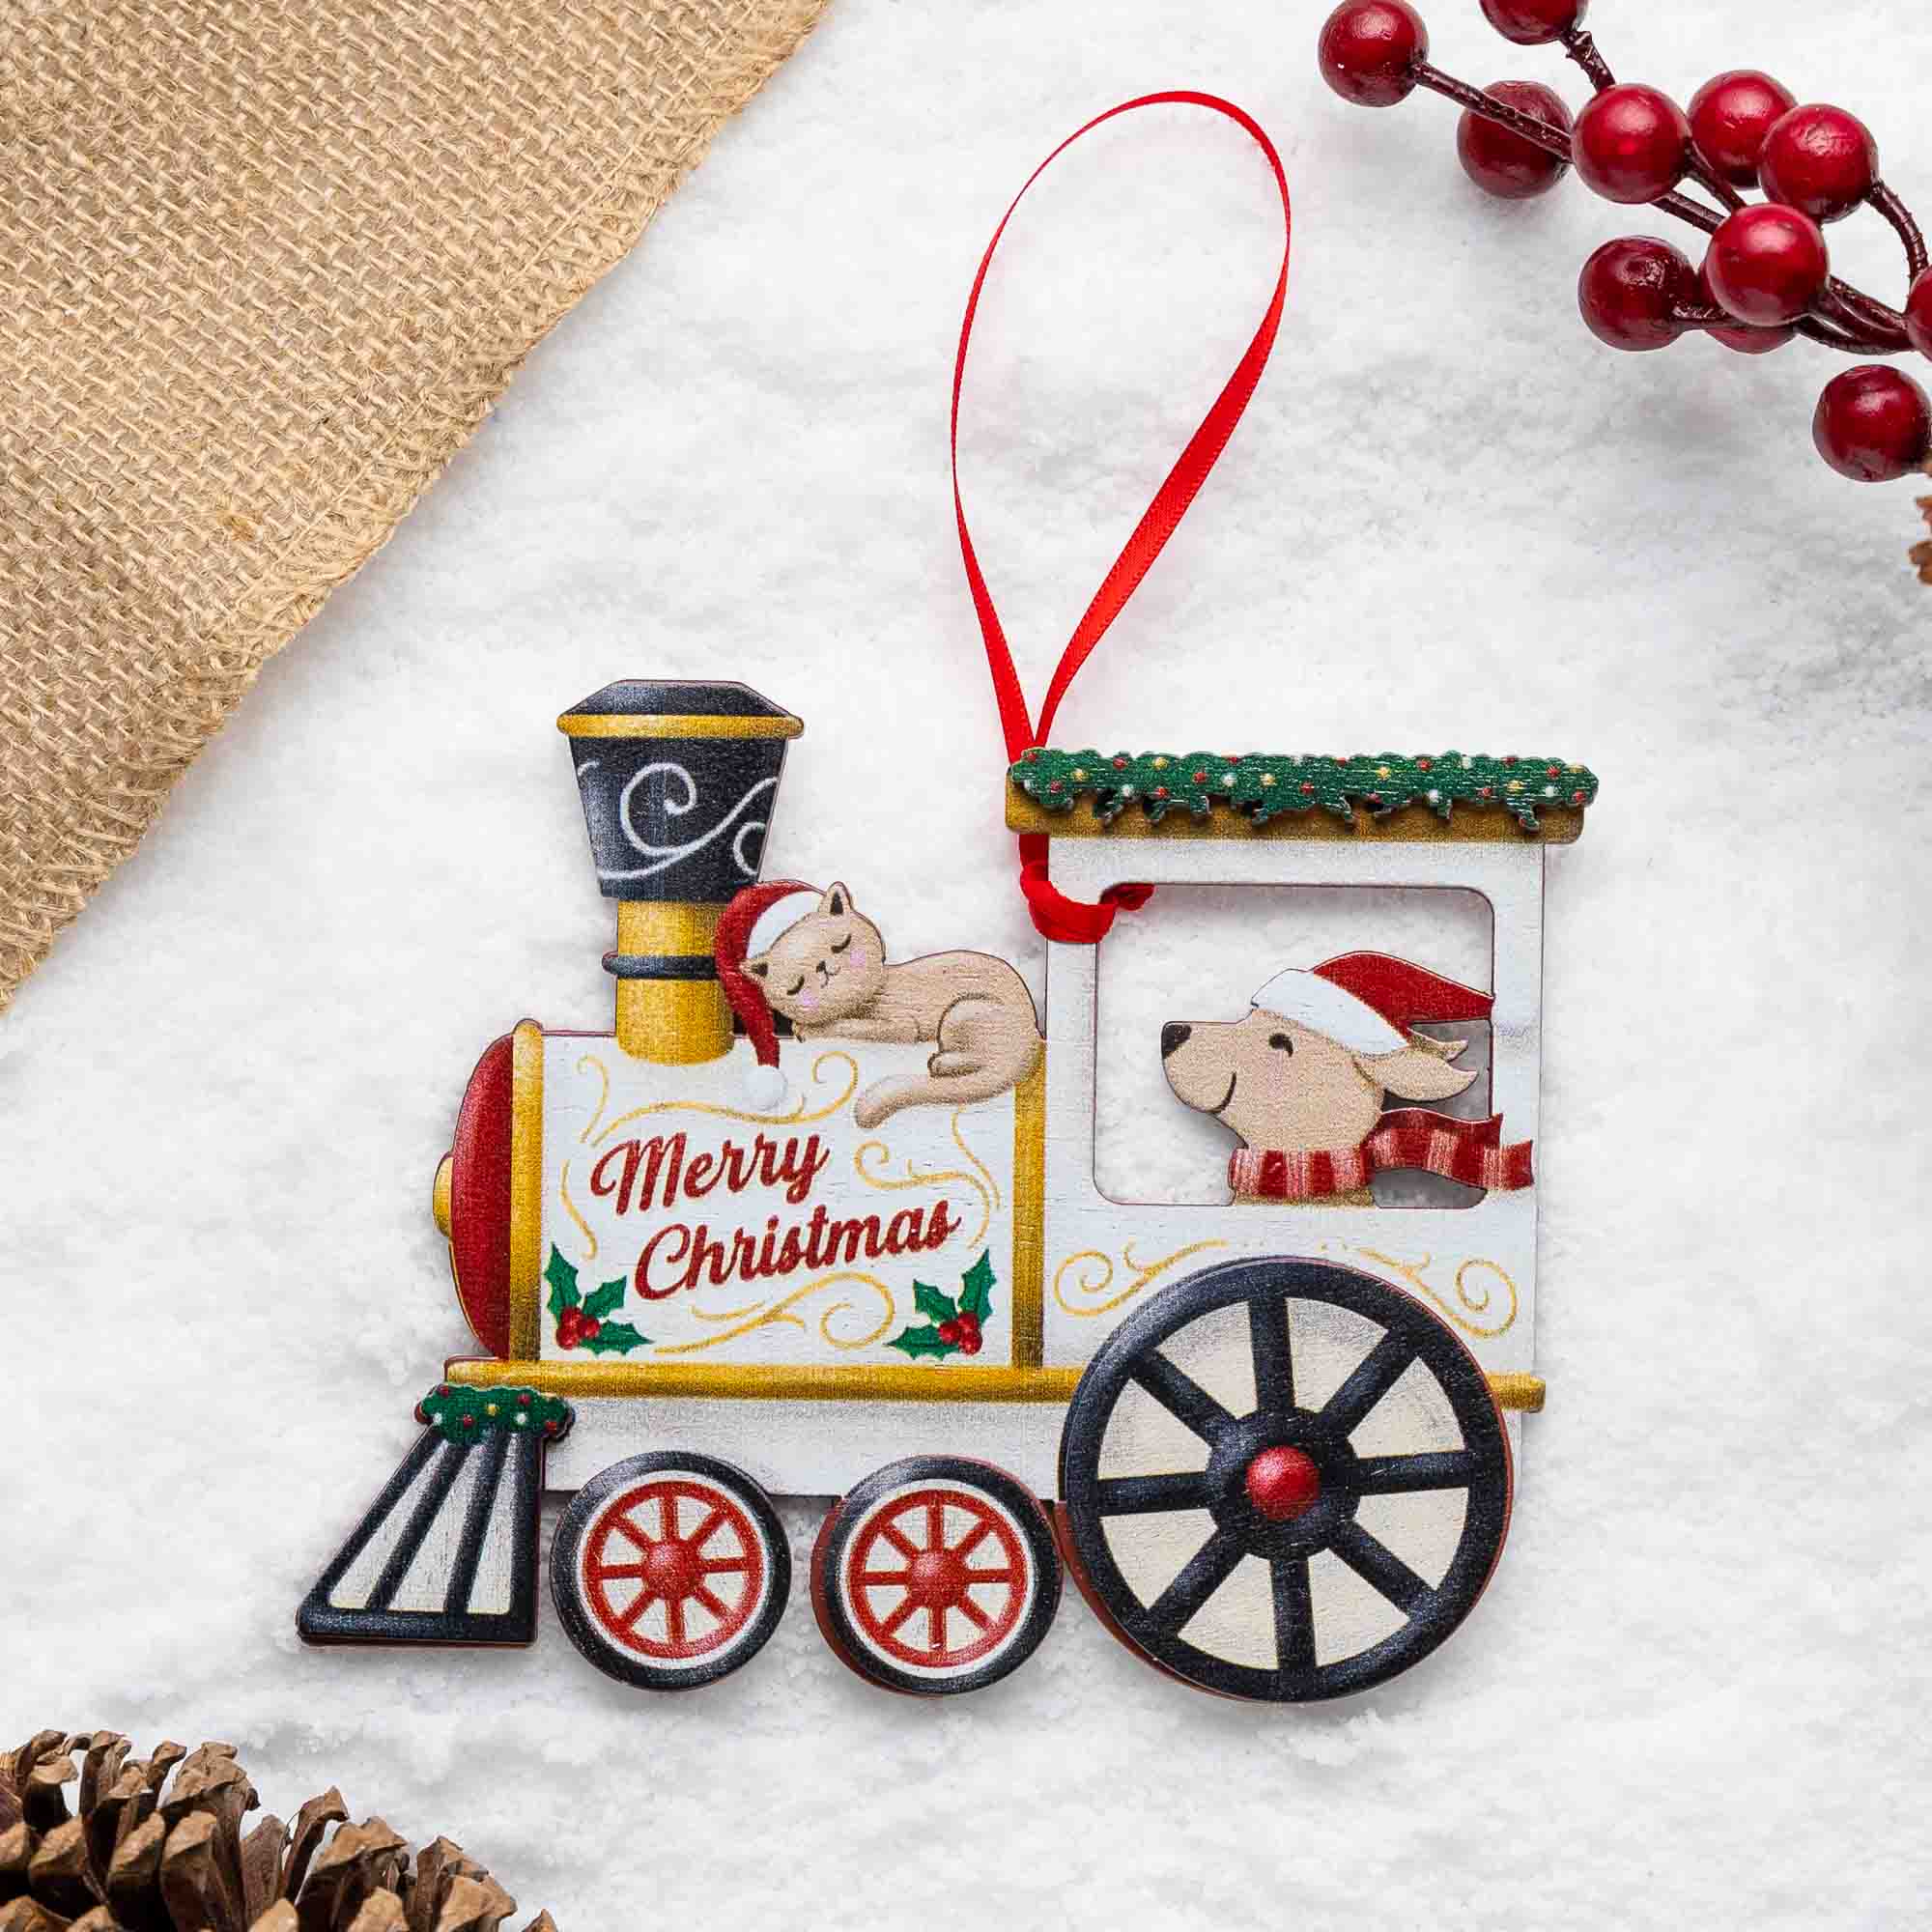 Merry Christmas Train Wooden Dog Ornament